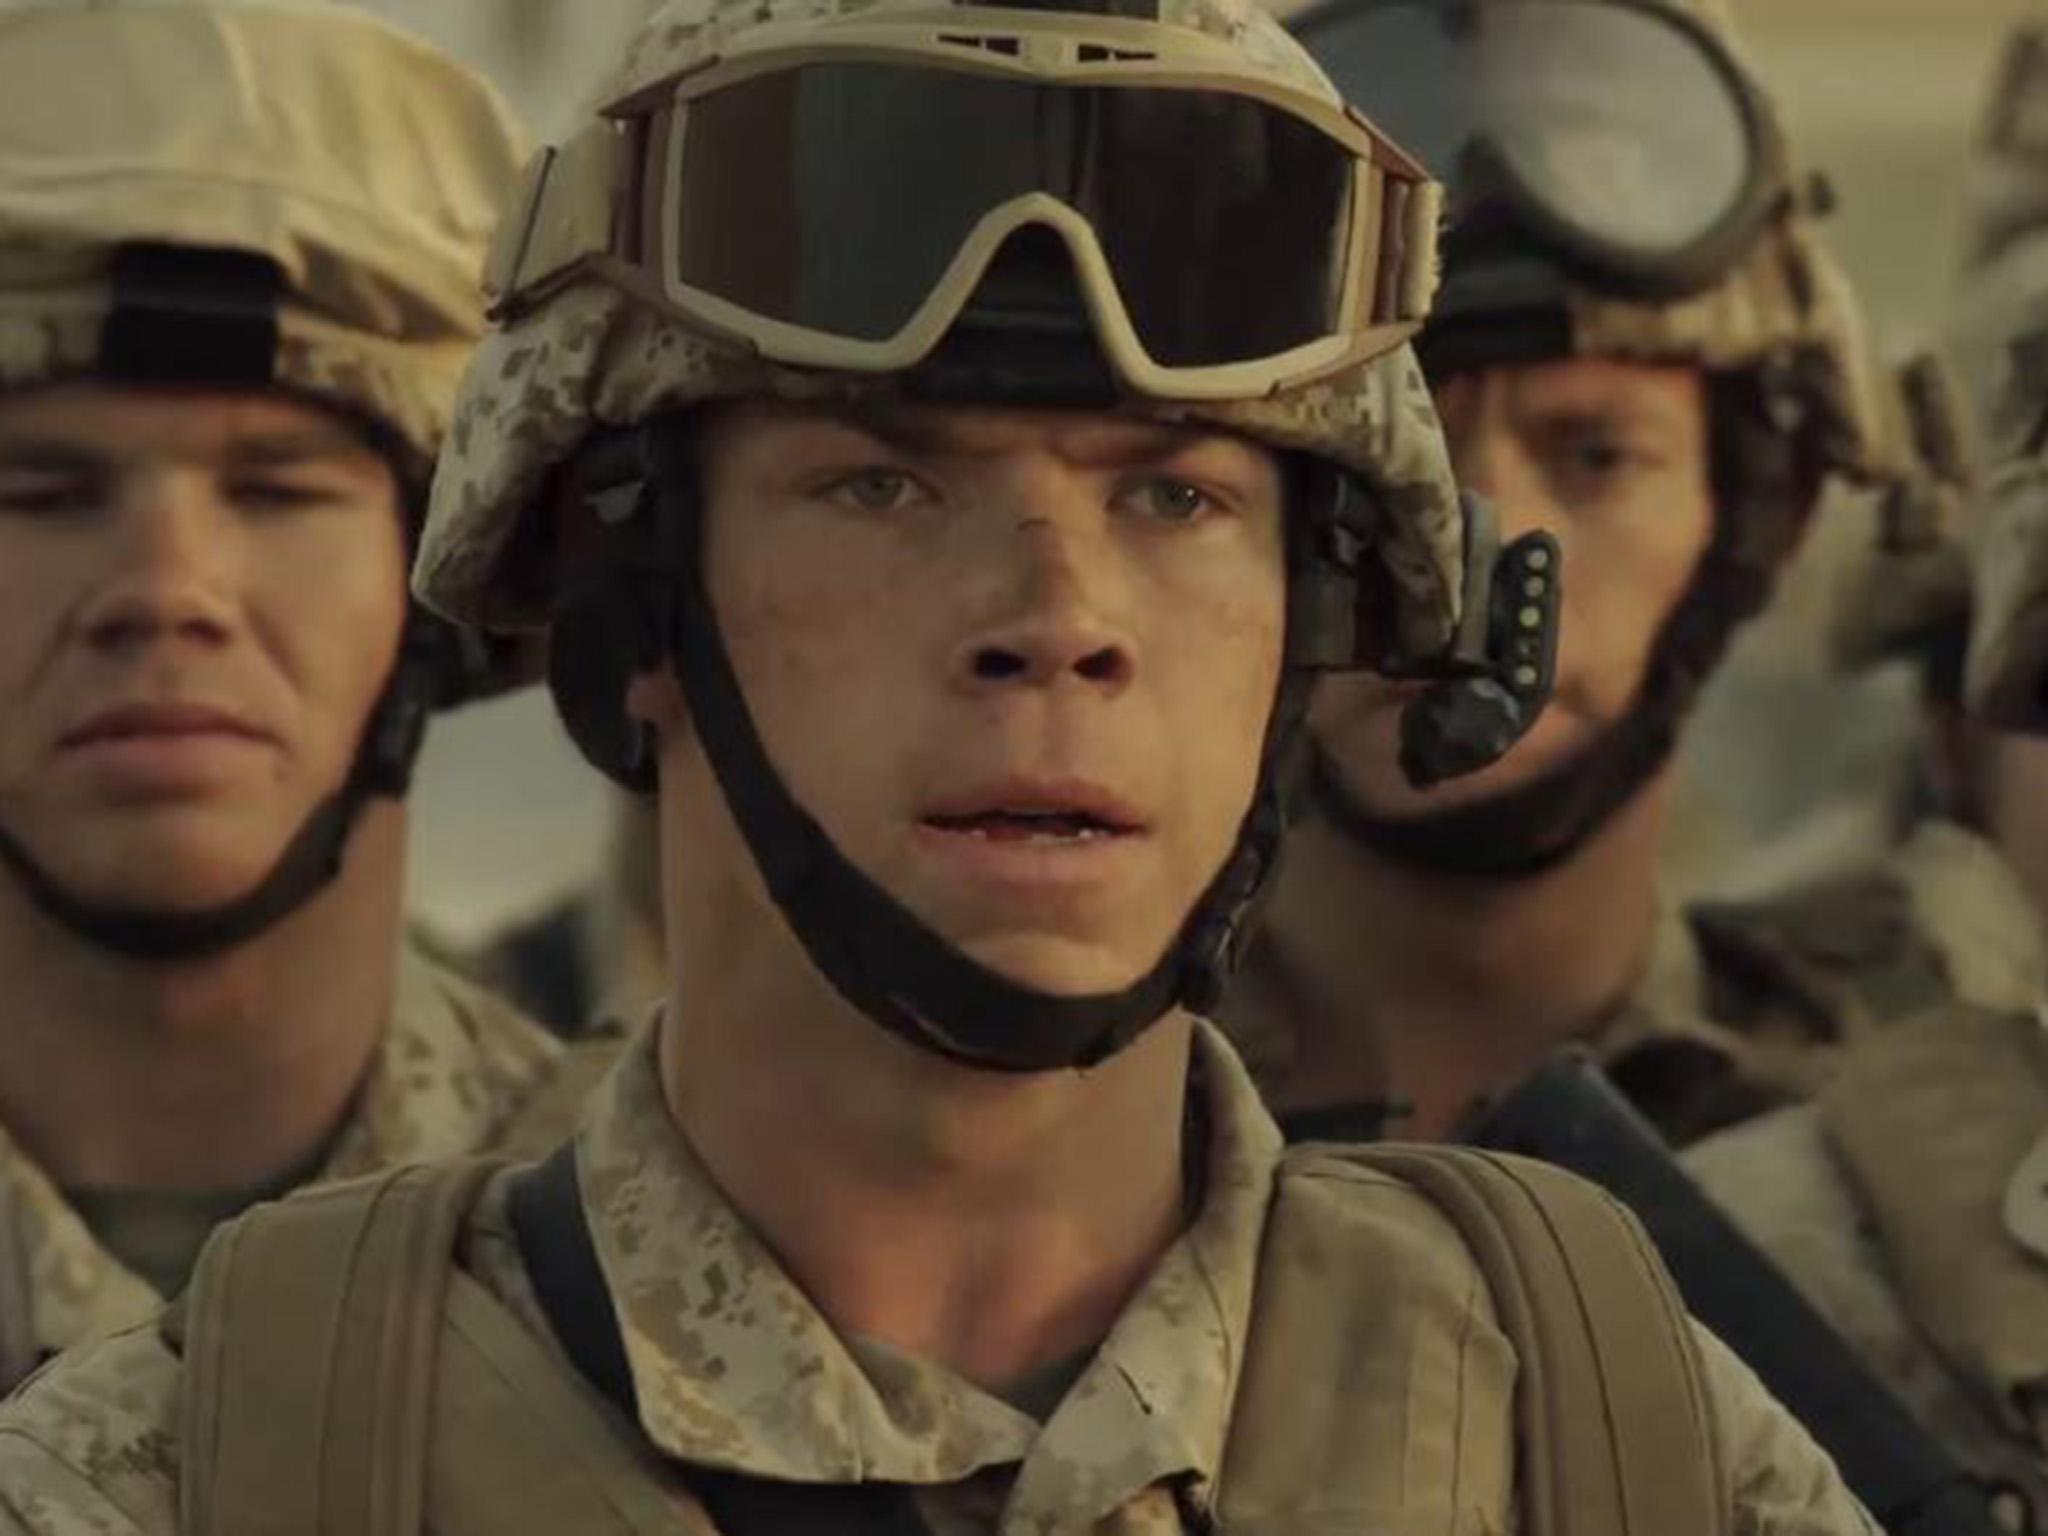 Poulter as Sgt Ricky Ortega, a Marine Corps infantry squad leader in ‘War Machine’